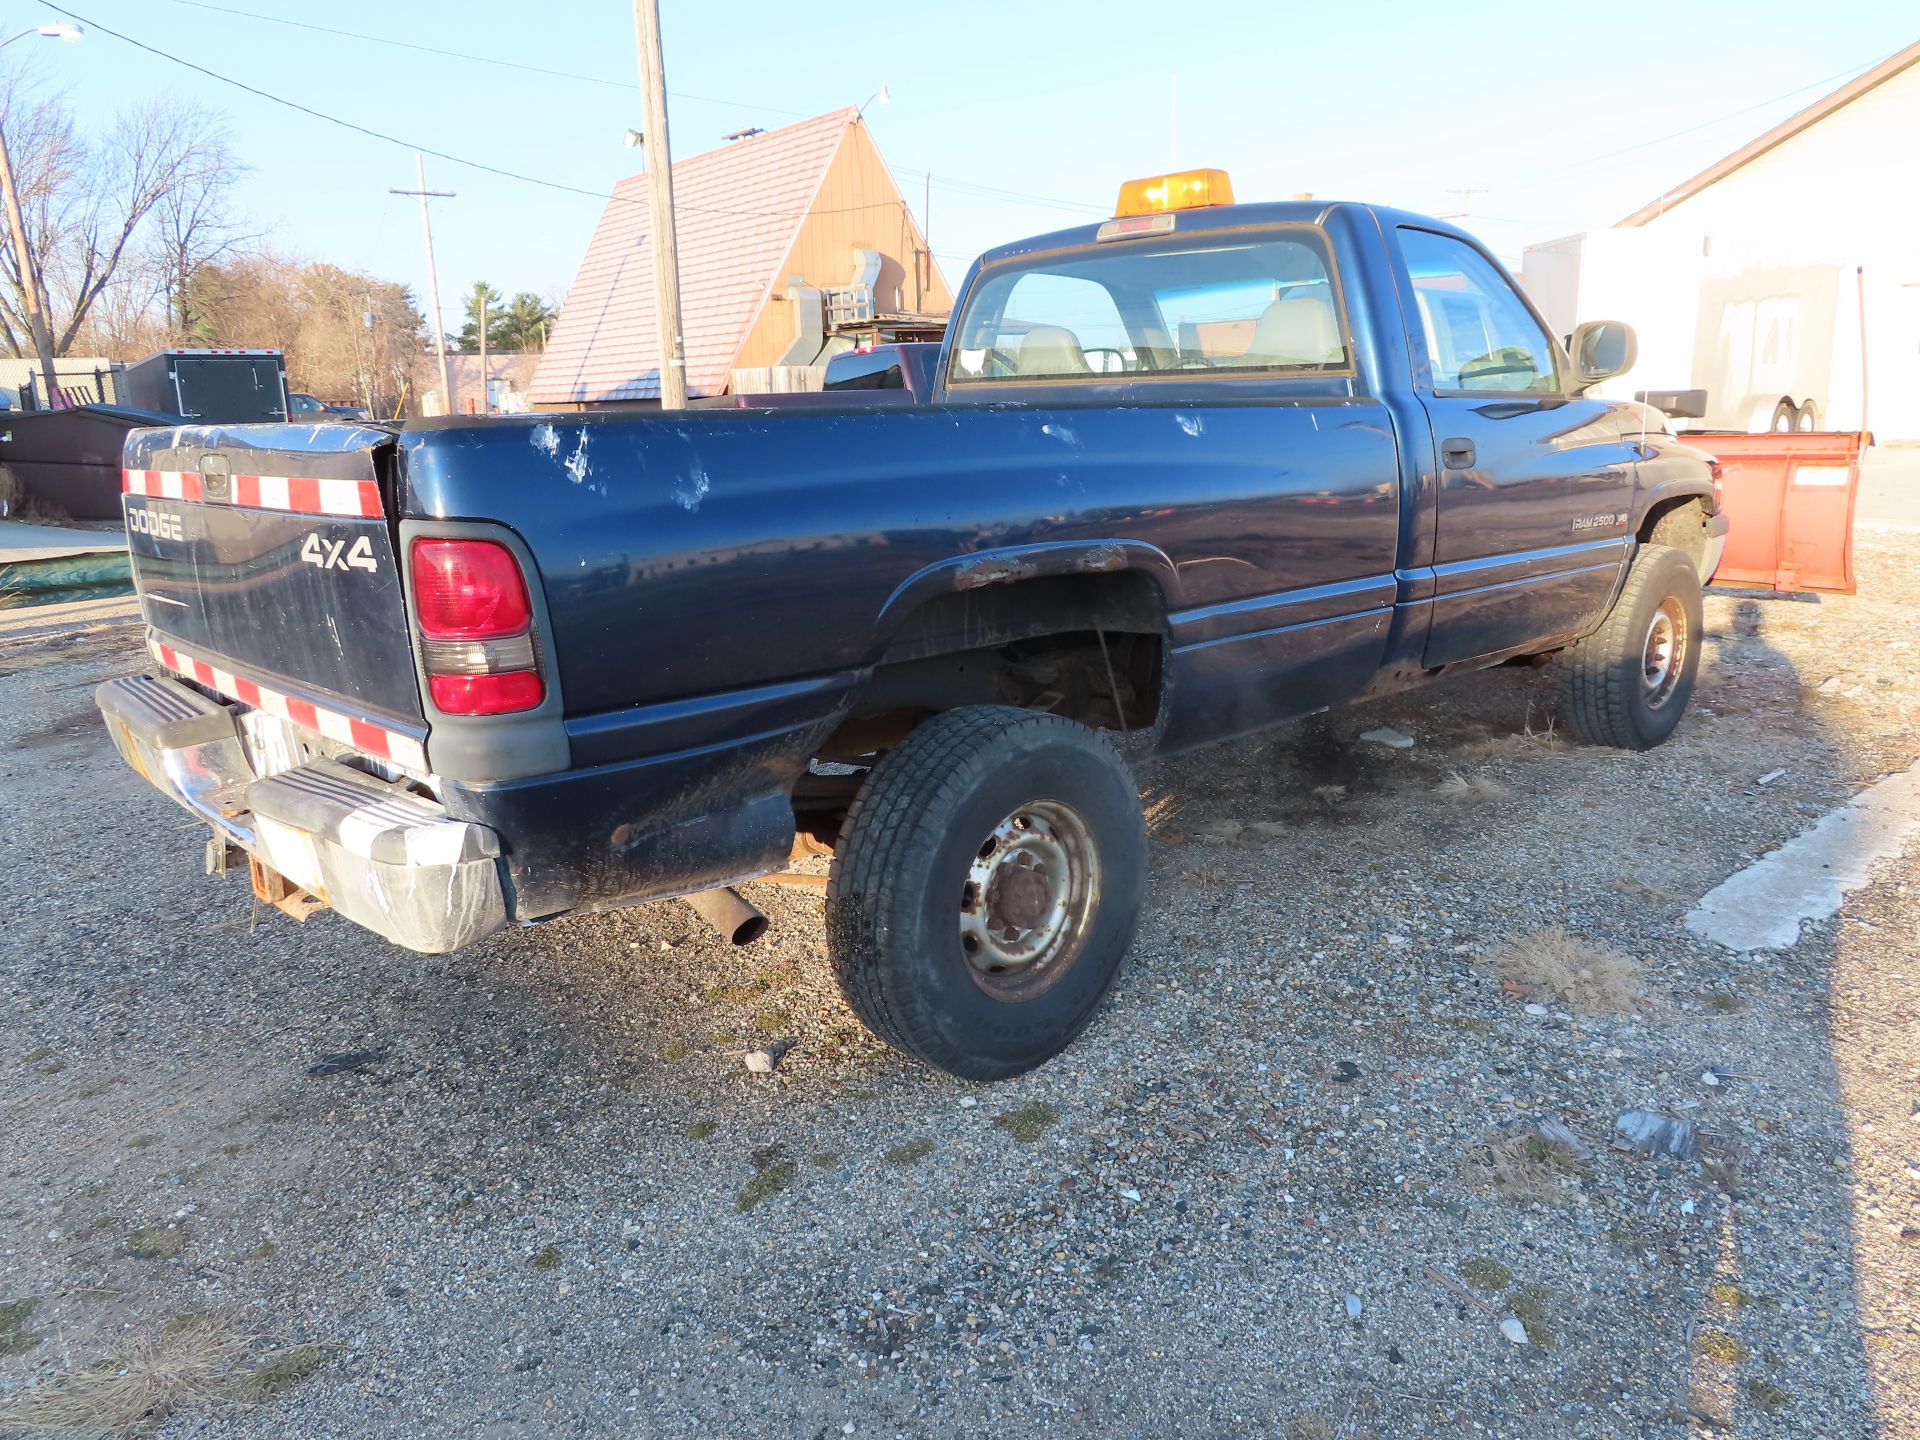 2002 Dodge Ram 2500 plow truck VIN 3B7KF26Z32M309373, 4wd, includes western plow with ultra-mount - Image 6 of 18